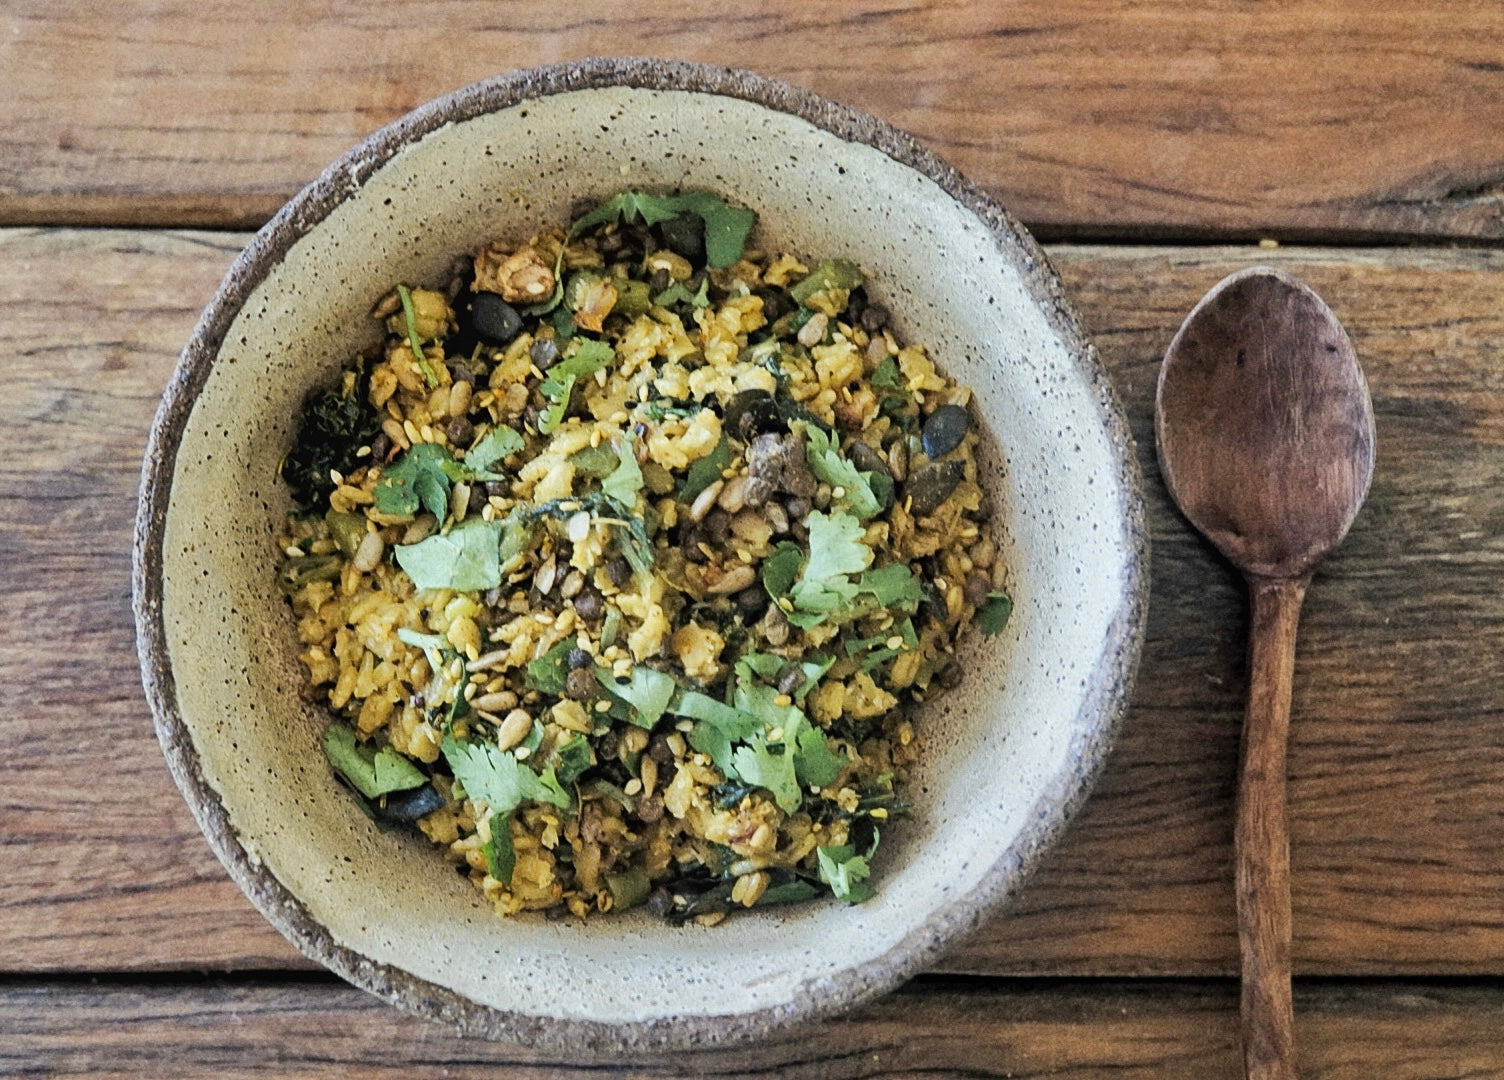 Savoury South Indian Oats with Kale and Green Beans